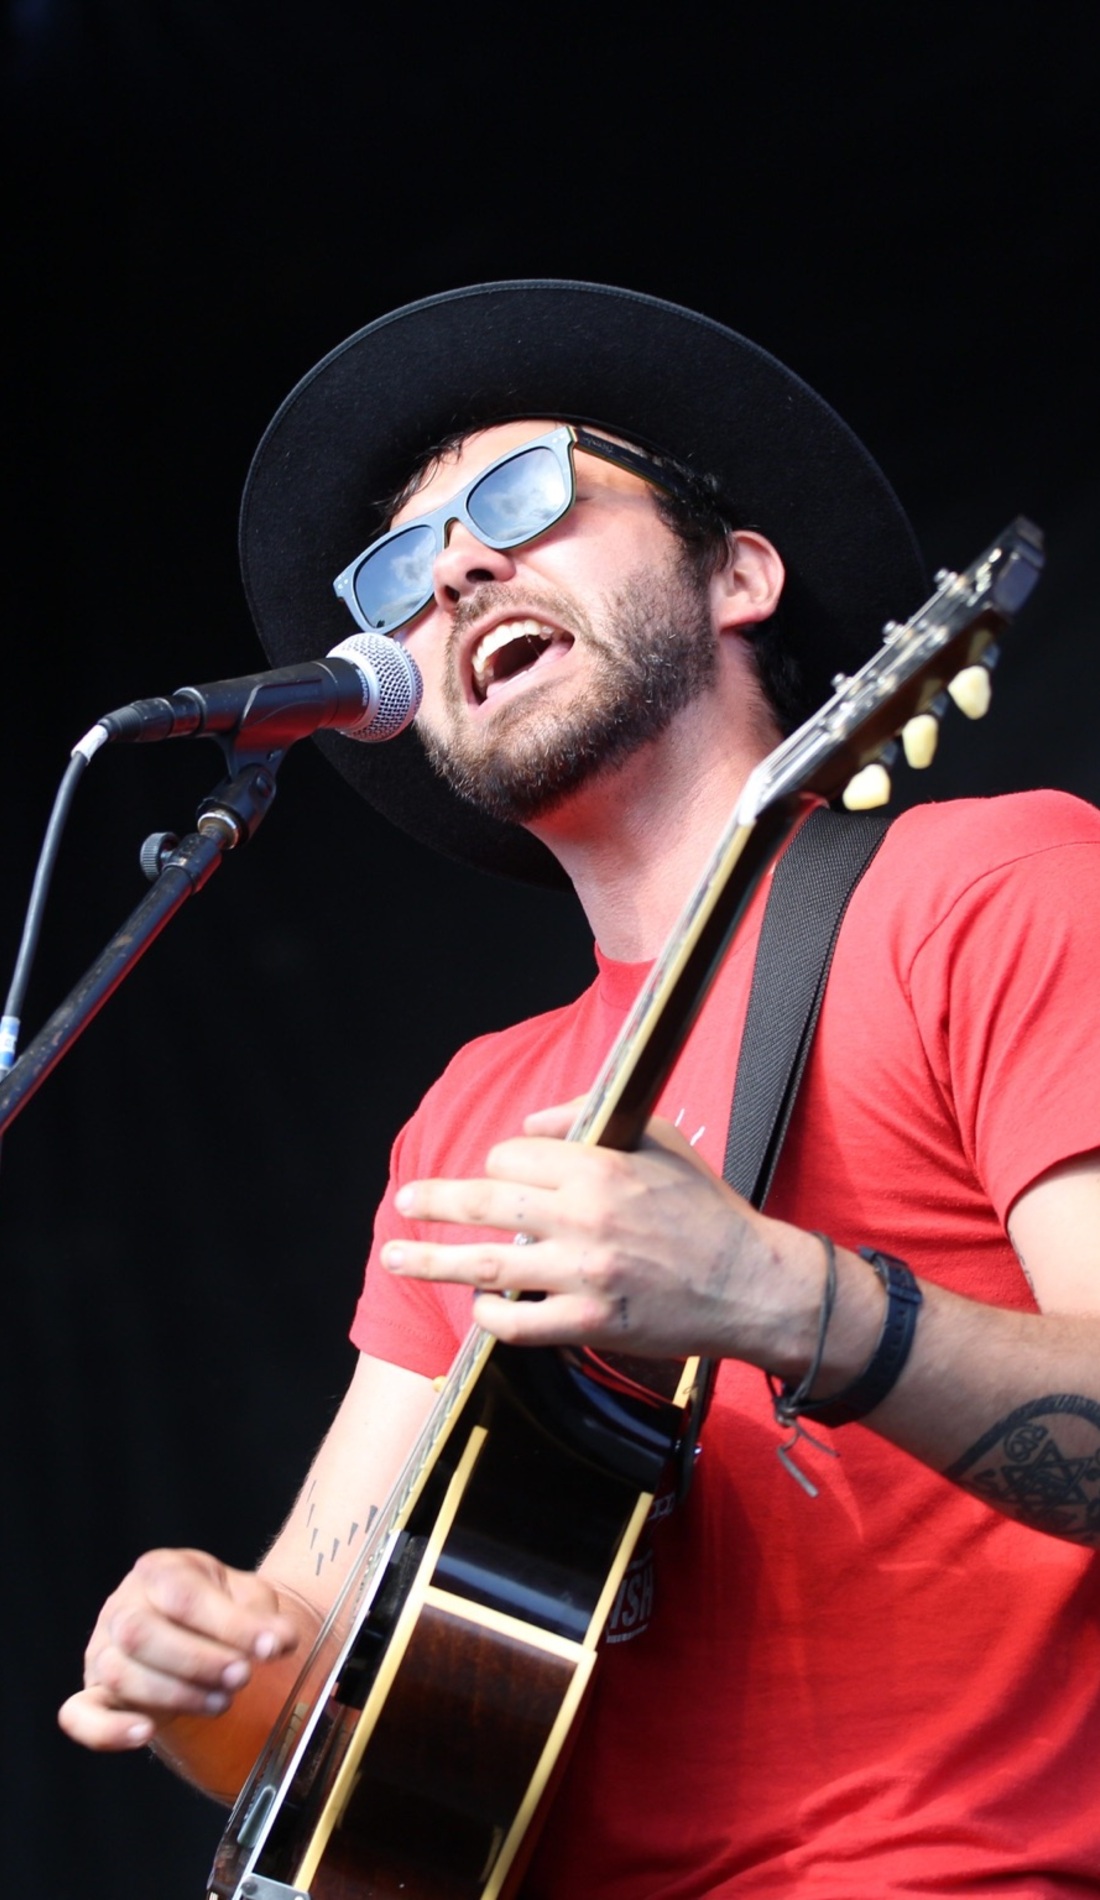 A Shakey Graves live event